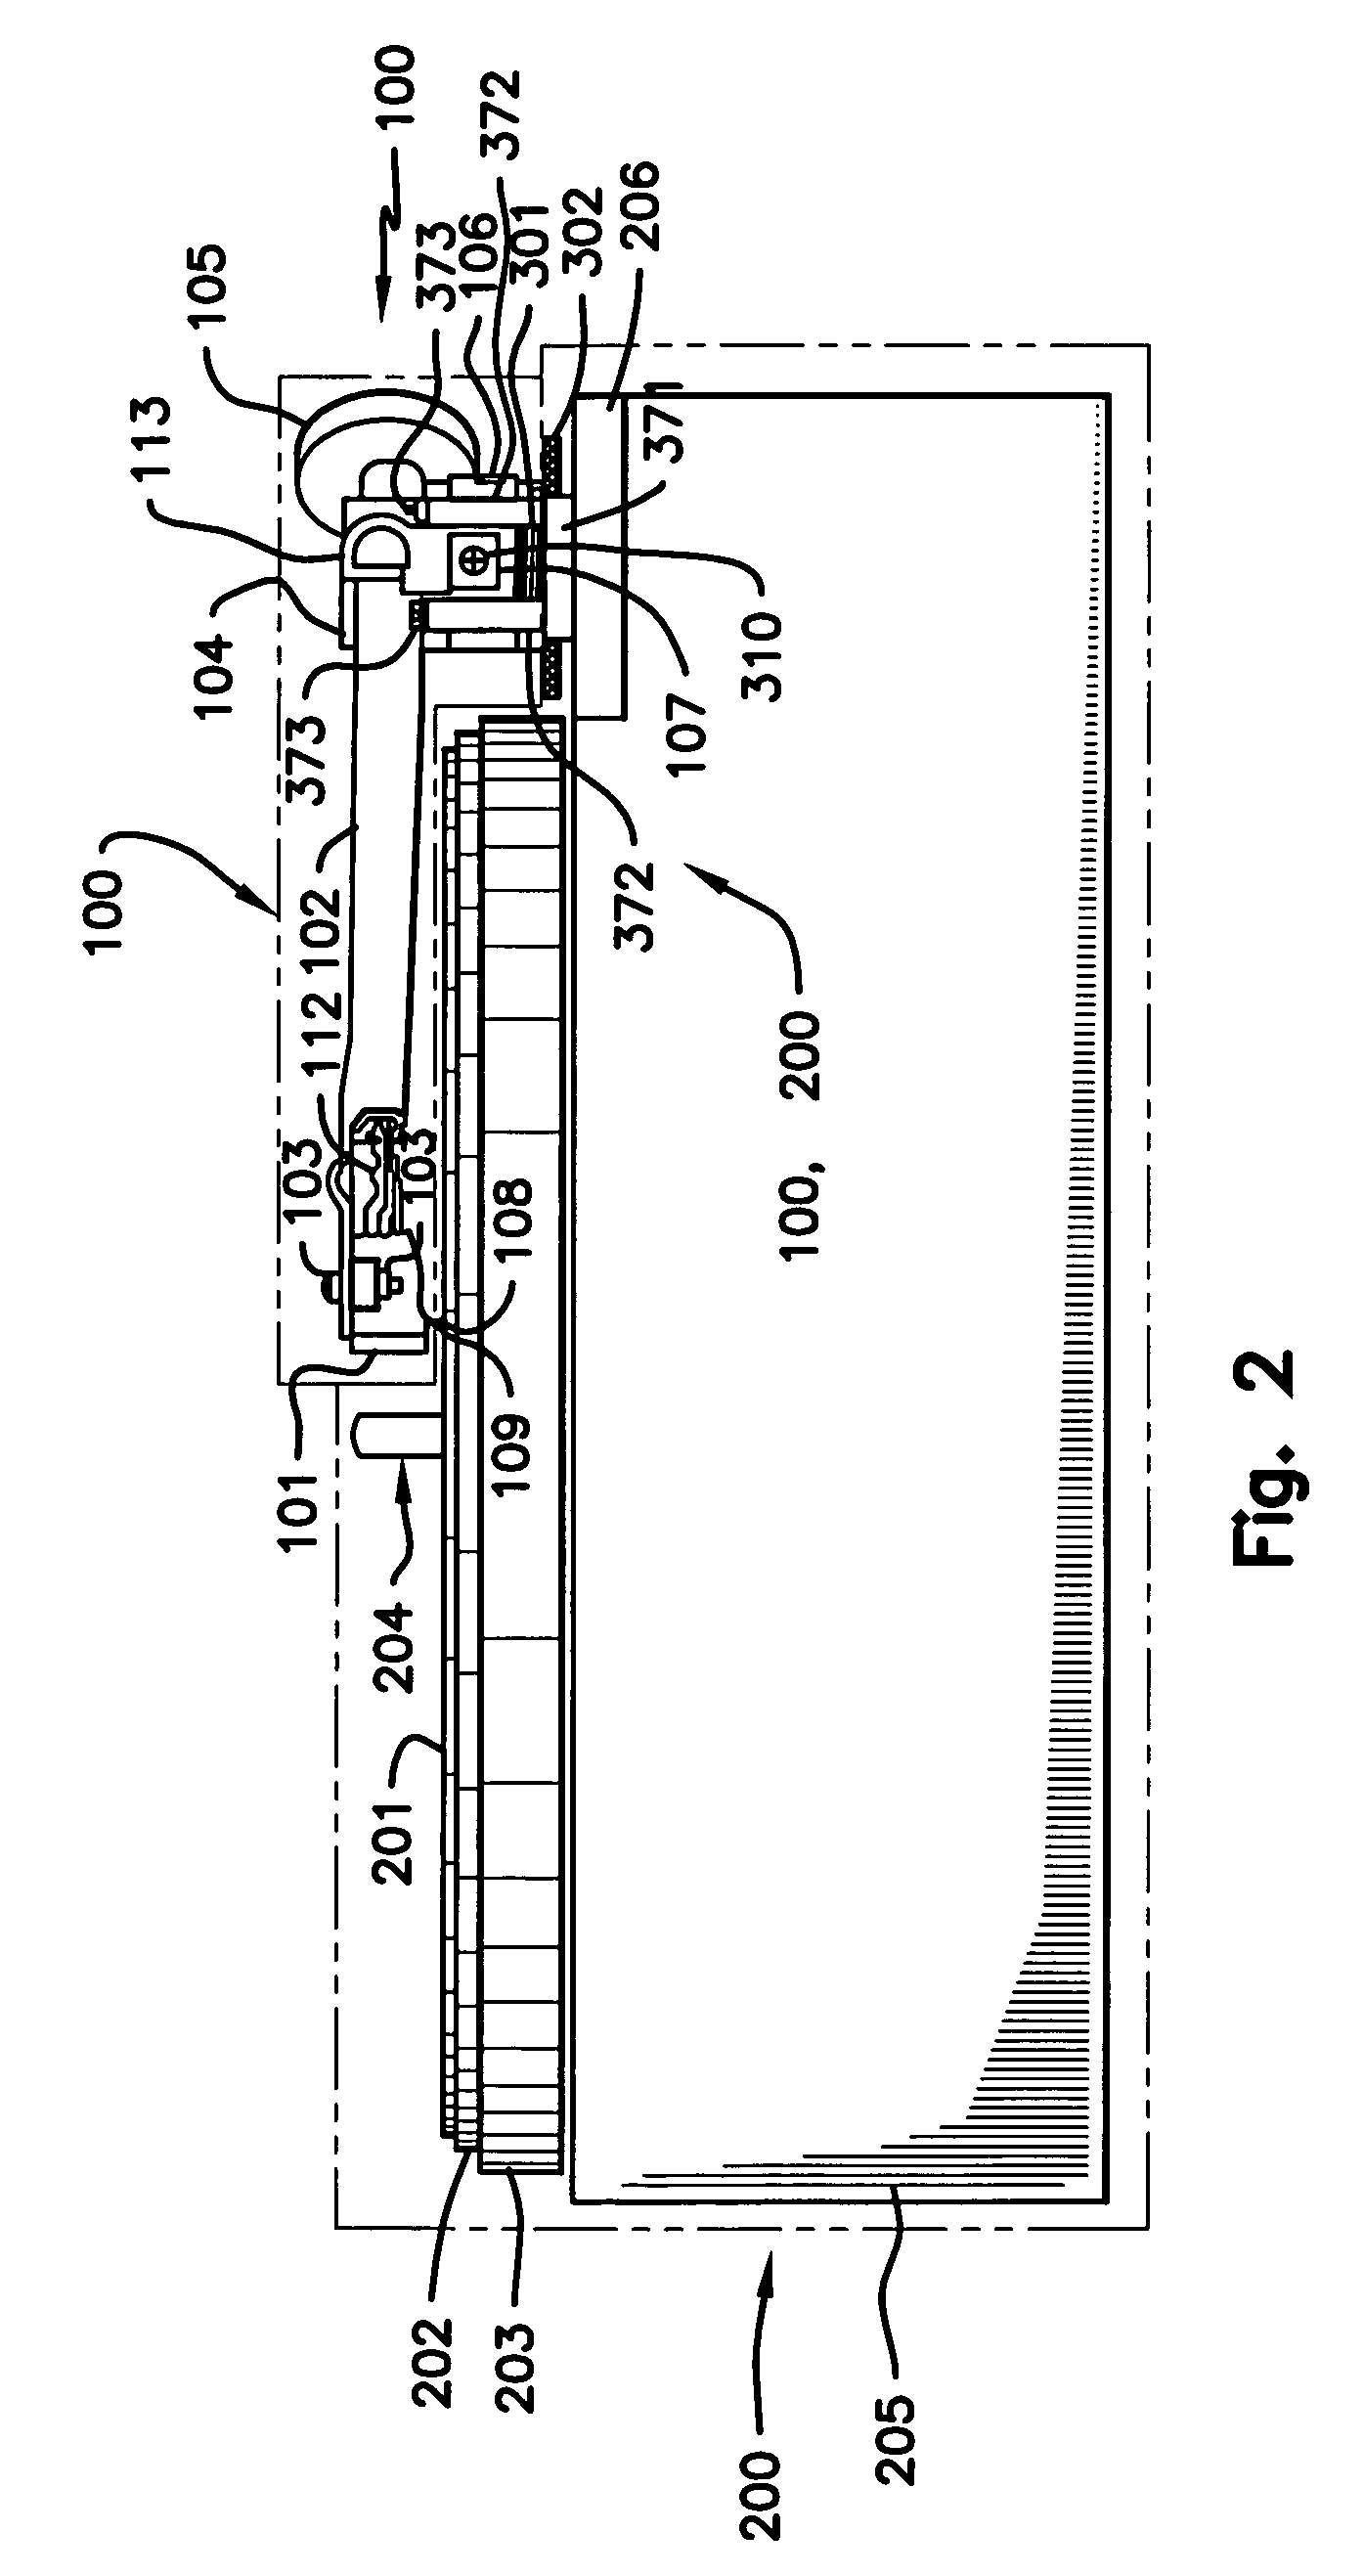 Phonograph tone arm mounting, decoupling, vertical tracking angle adjustment system, and vertical guide system